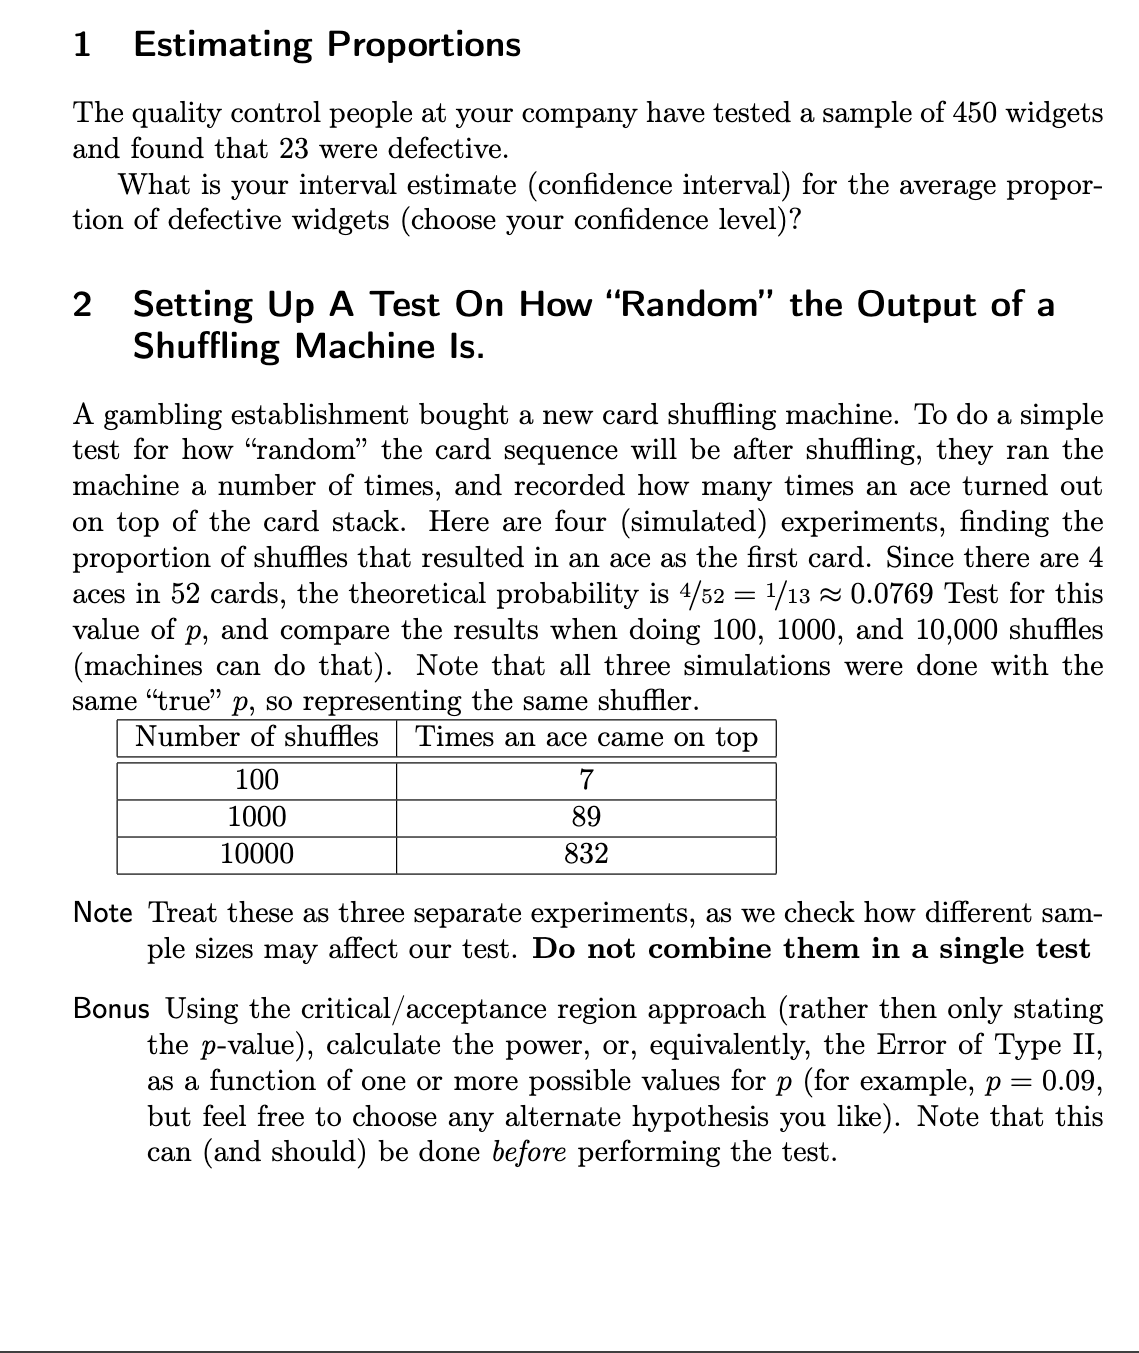 1 Estimating Proportions
The quality control people at your company have tested a sample of 450 widgets
and found that 23 were defective.
What is your interval estimate (confidence interval) for the average propor-
tion of defective widgets (choose your confidence level)?
2 Setting Up A Test On How "Random" the Output of a
Shuffling Machine Is.
A gambling establishment bought a new card shuffling machine. To do a simple
test for how "random” the card sequence will be after shuffling, they ran the
machine a number of times, and recorded how many times an ace turned out
on top of the card stack. Here are four (simulated) experiments, finding the
proportion of shuffles that resulted in an ace as the first card. Since there are 4
aces in 52 cards, the theoretical probability is 4/52 = ¹/13 ≈ 0.0769 Test for this
value of p, and compare the results when doing 100, 1000, and 10,000 shuffles
(machines can do that). Note that all three simulations were done with the
same "true" p, so representing the same shuffler.
Number of shuffles Times an ace came on top
100
1000
10000
7
89
832
Note Treat these as three separate experiments, as we check how different sam-
ple sizes may affect our test. Do not combine them in a single test
Bonus Using the critical/acceptance region approach (rather then only stating
the p-value), calculate the power, or, equivalently, the Error of Type II,
as a function of one or more possible values for p (for example, p = 0.09,
but feel free to choose any alternate hypothesis you like). Note that this
can (and should) be done before performing the test.